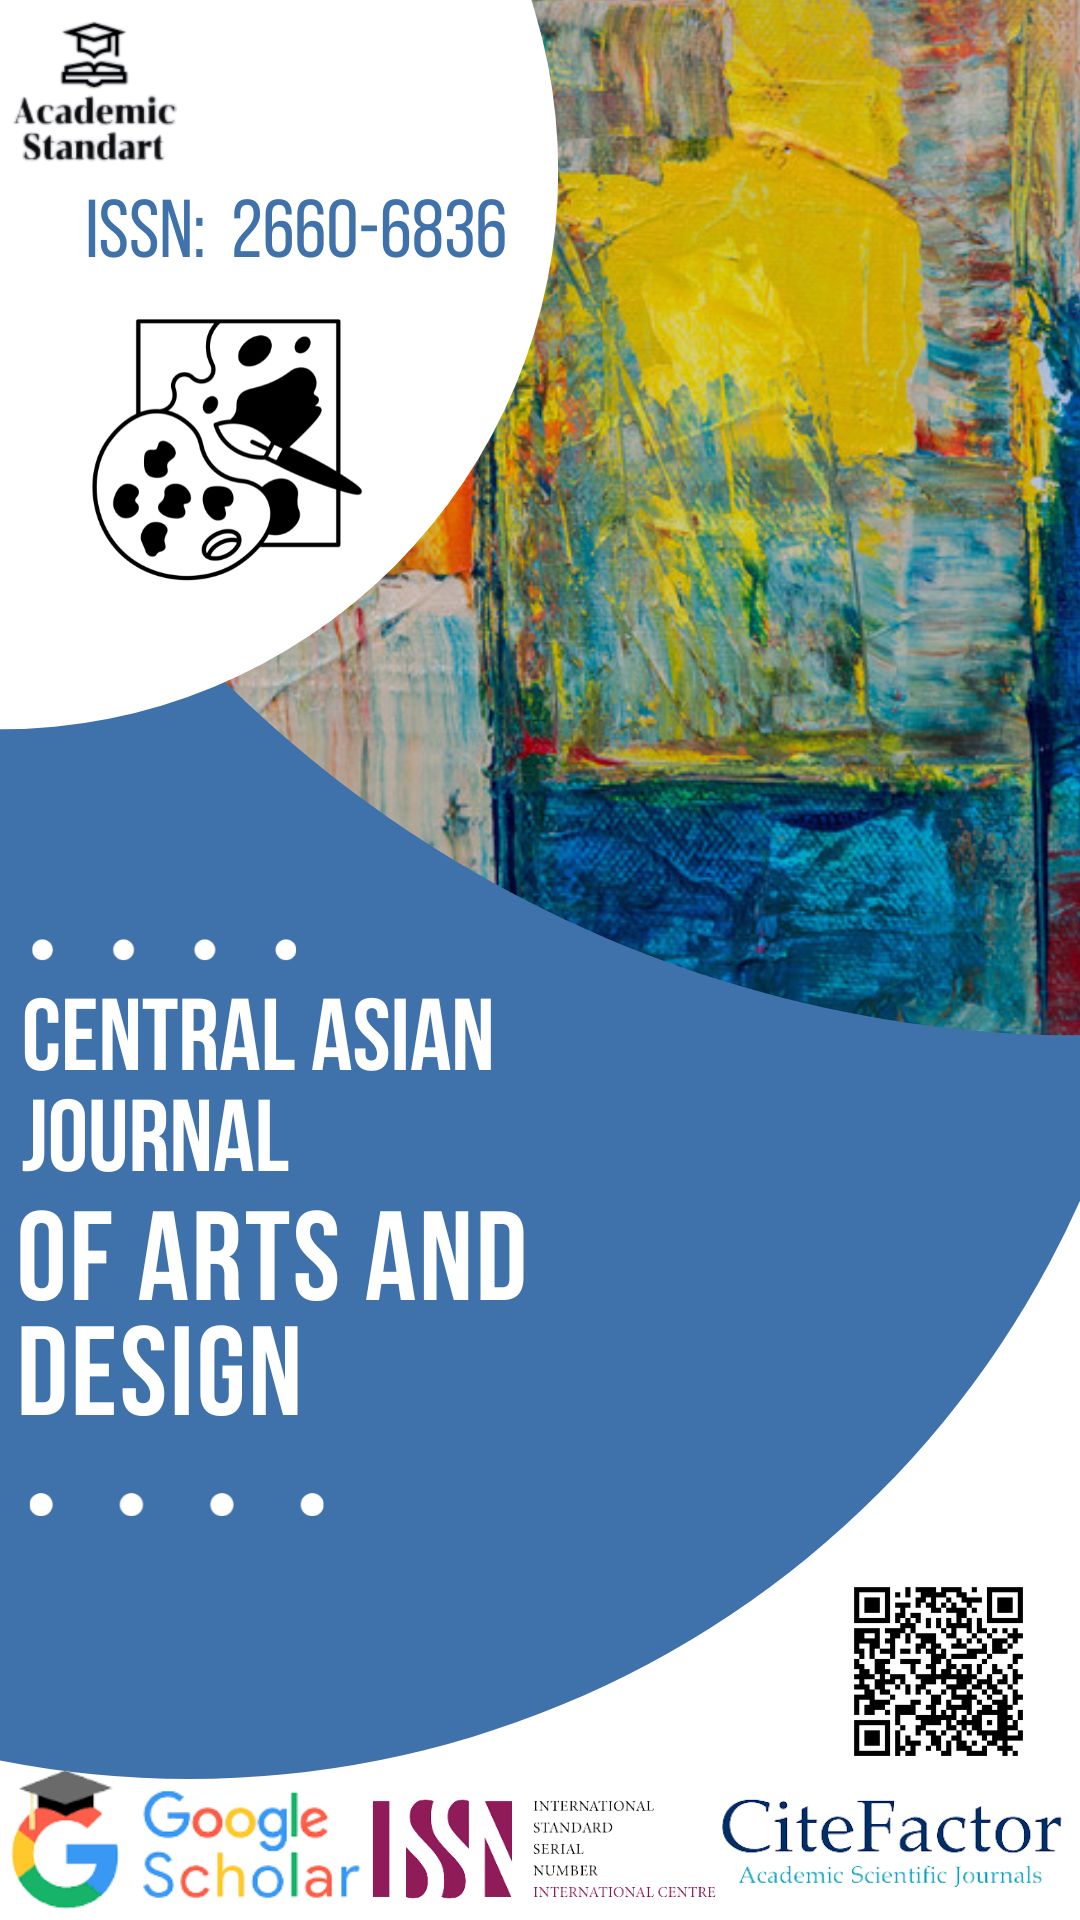 Central Asian Journal of Arts and Design